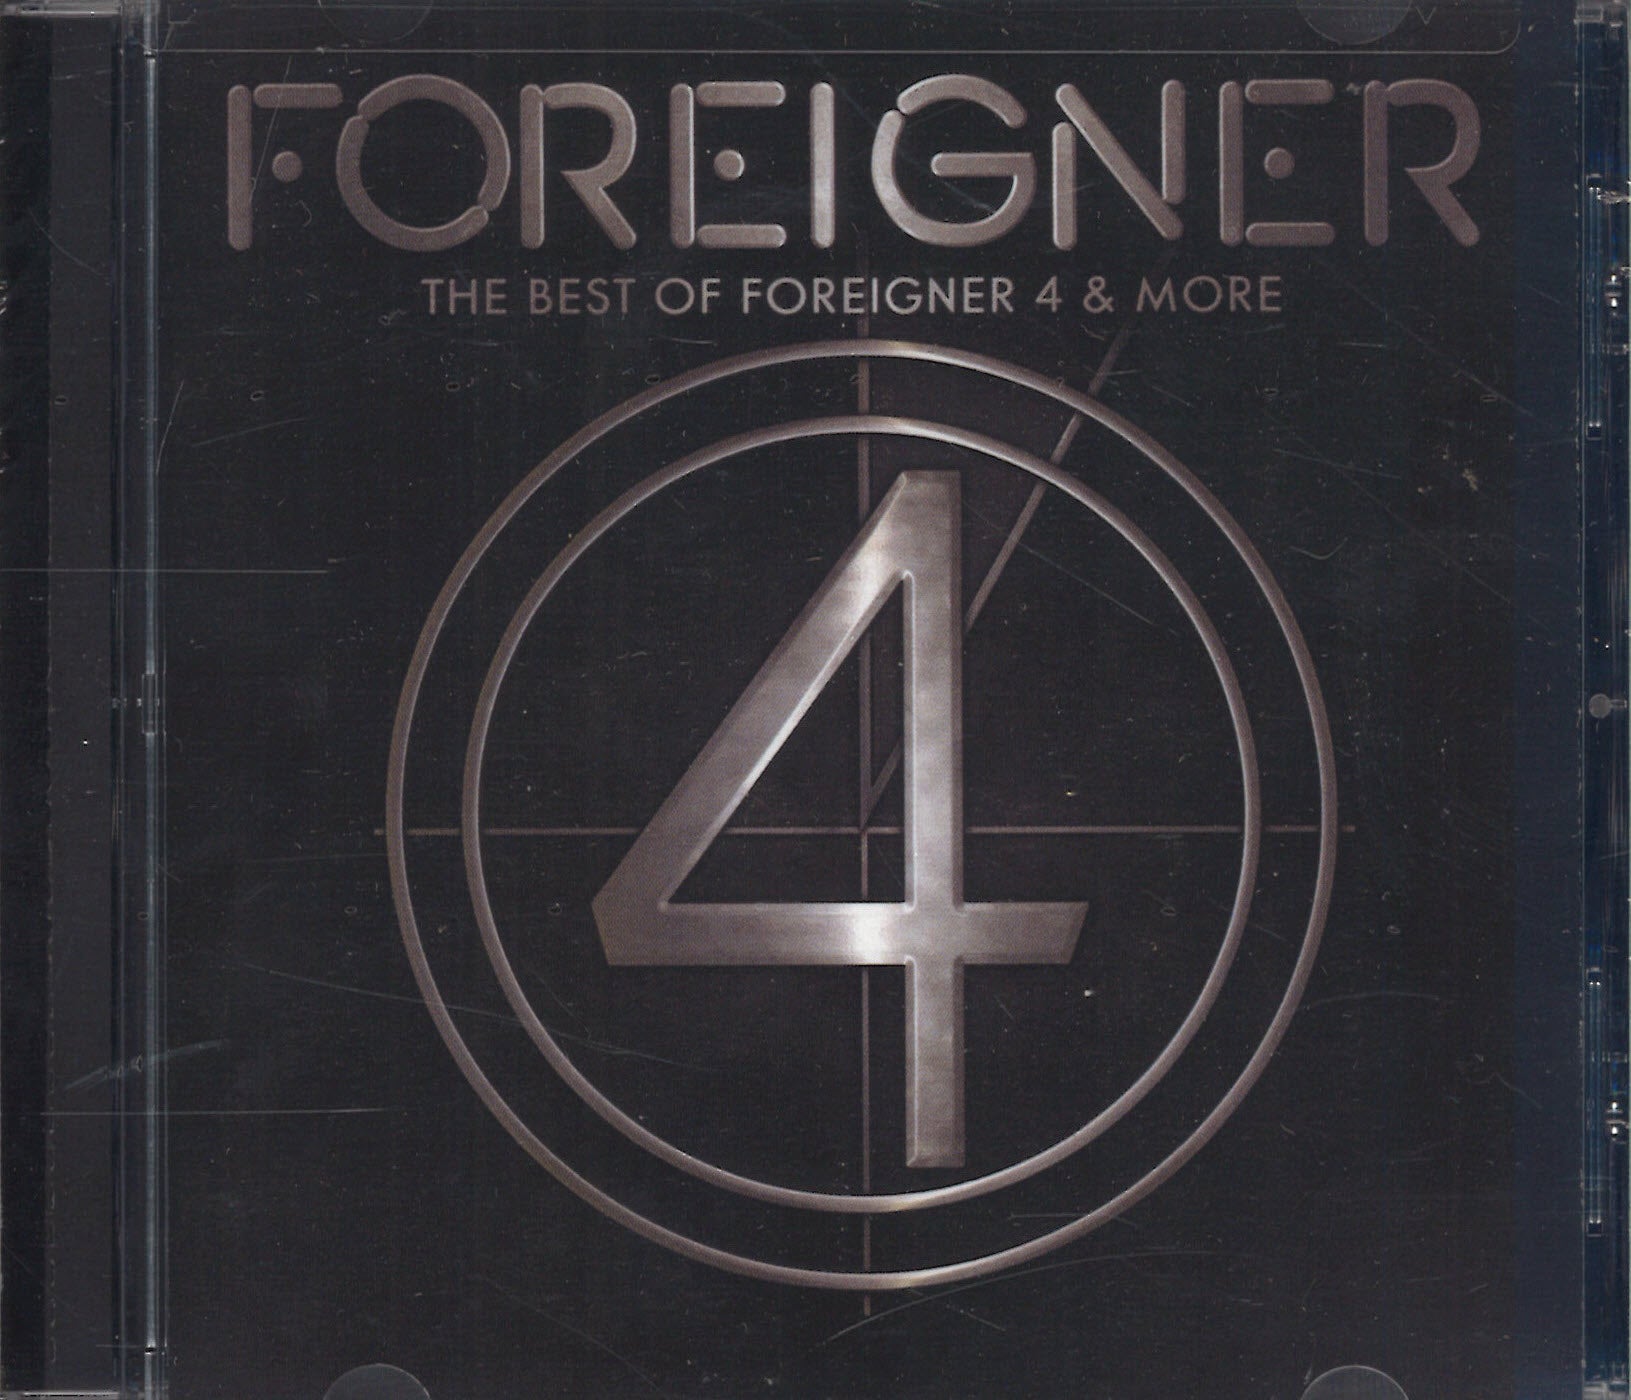 Foreigner The Best Of Foreigner 4 & More